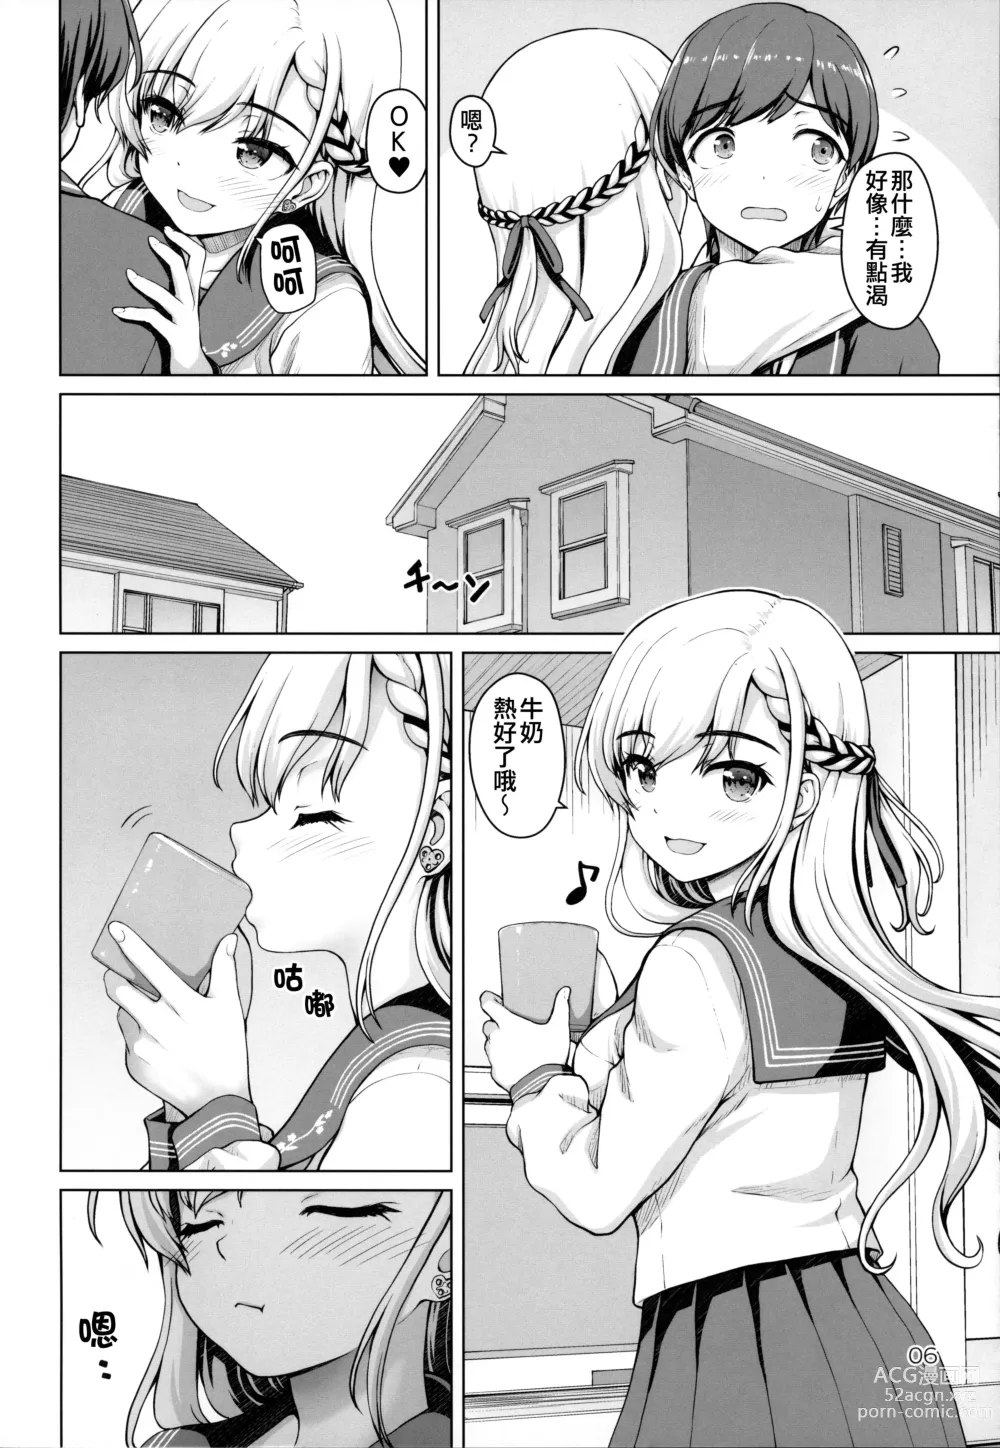 Page 6 of doujinshi Parallel Hayate Route